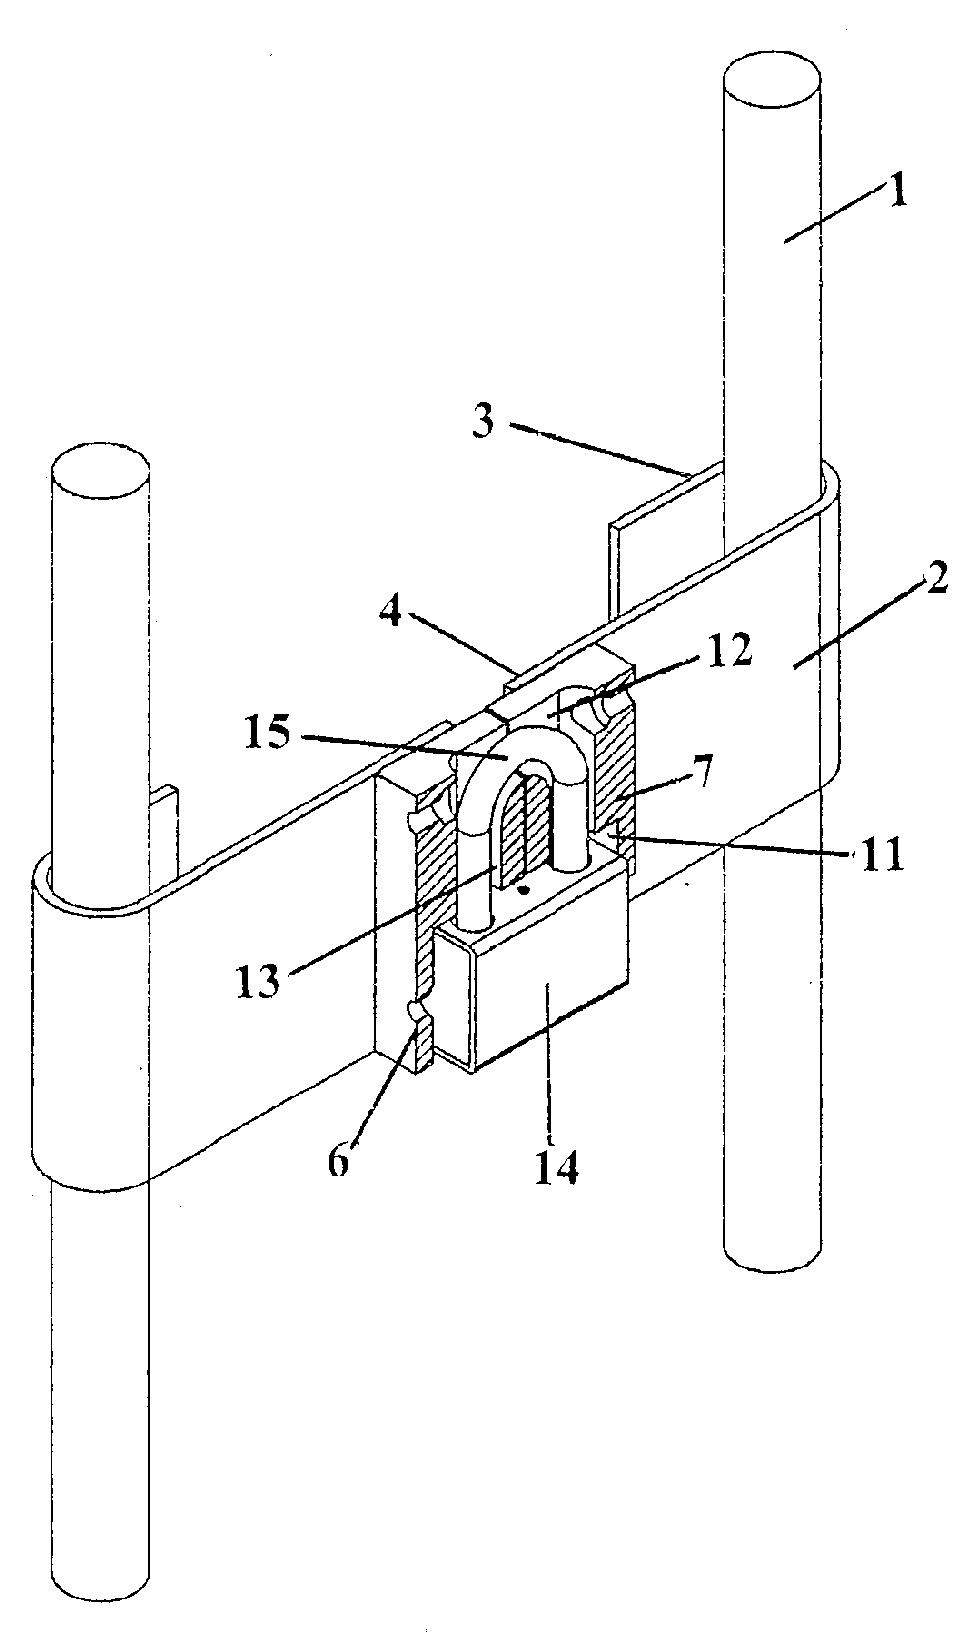 Device for locking containers